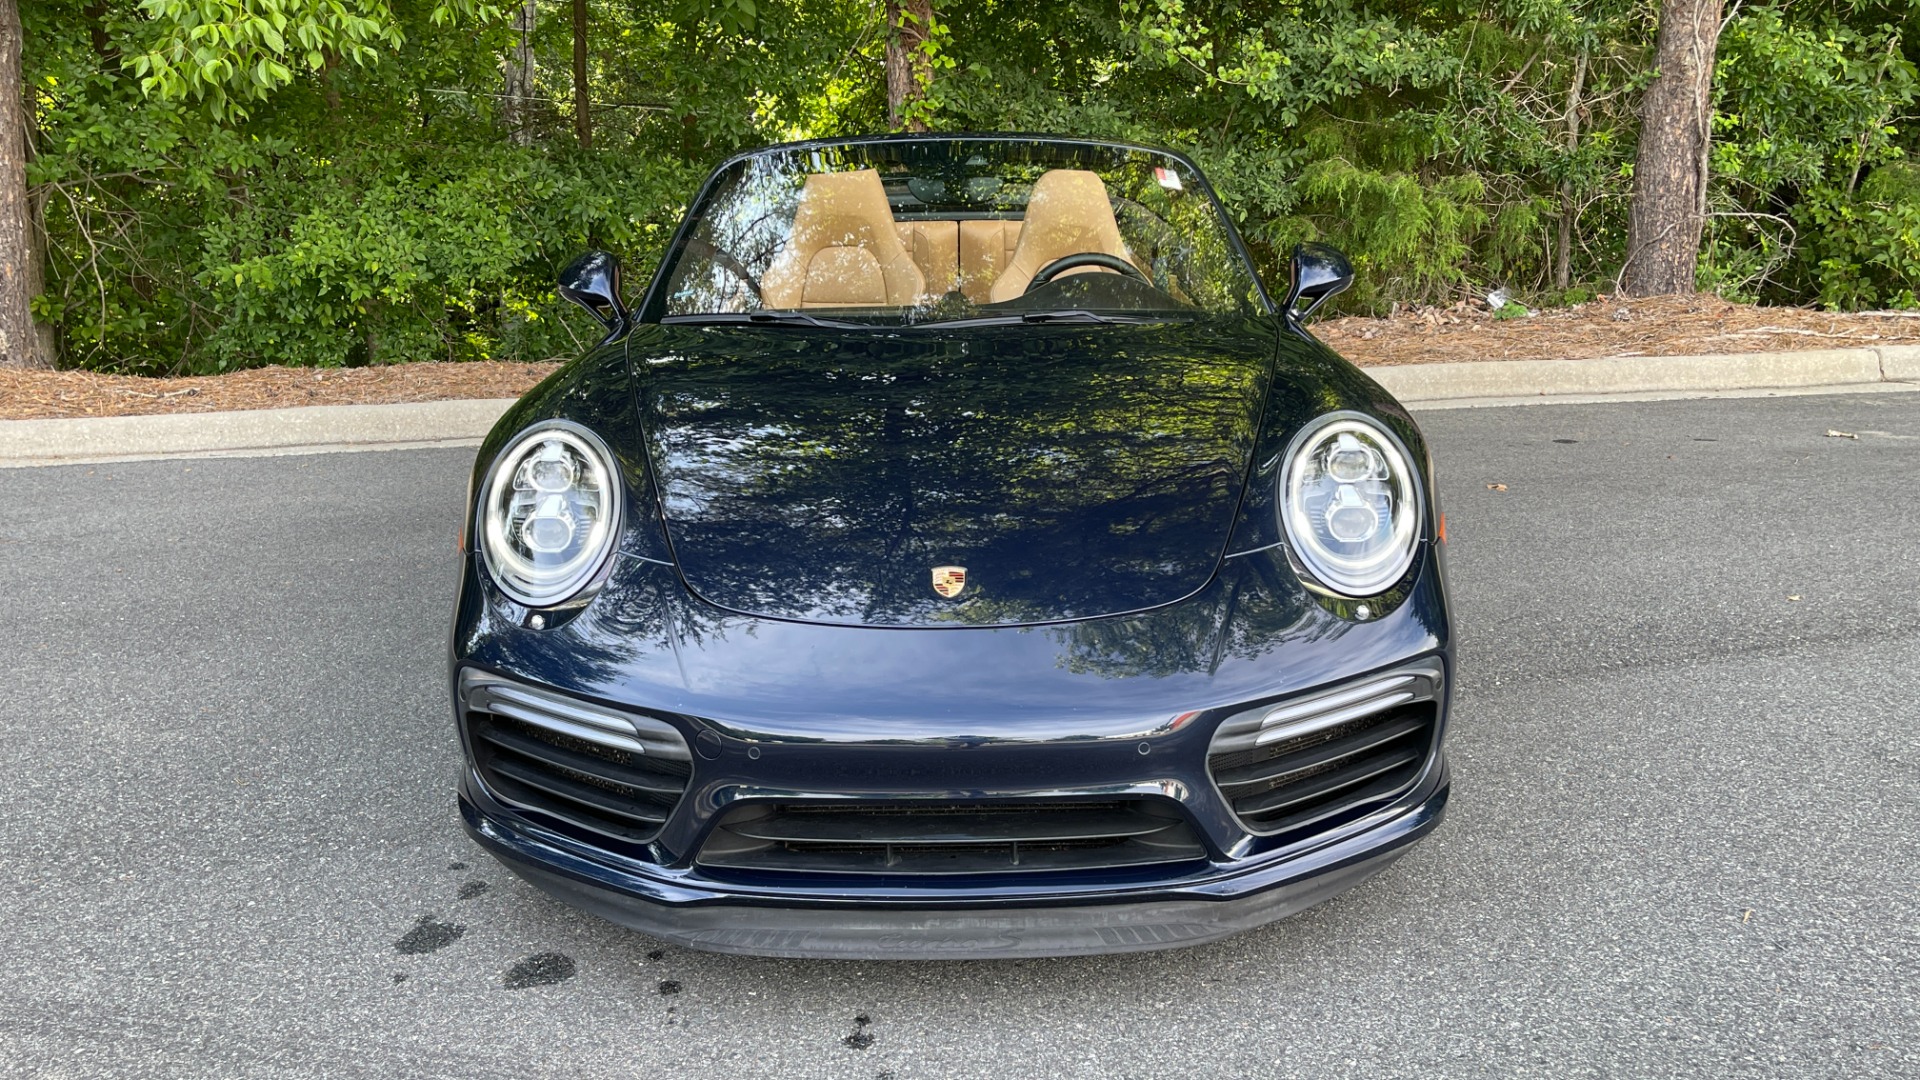 Used 2017 Porsche 911 Turbo S / CABRIOLET / FRONT LIFT / PDK / 20IN WHEELS for sale $179,999 at Formula Imports in Charlotte NC 28227 20